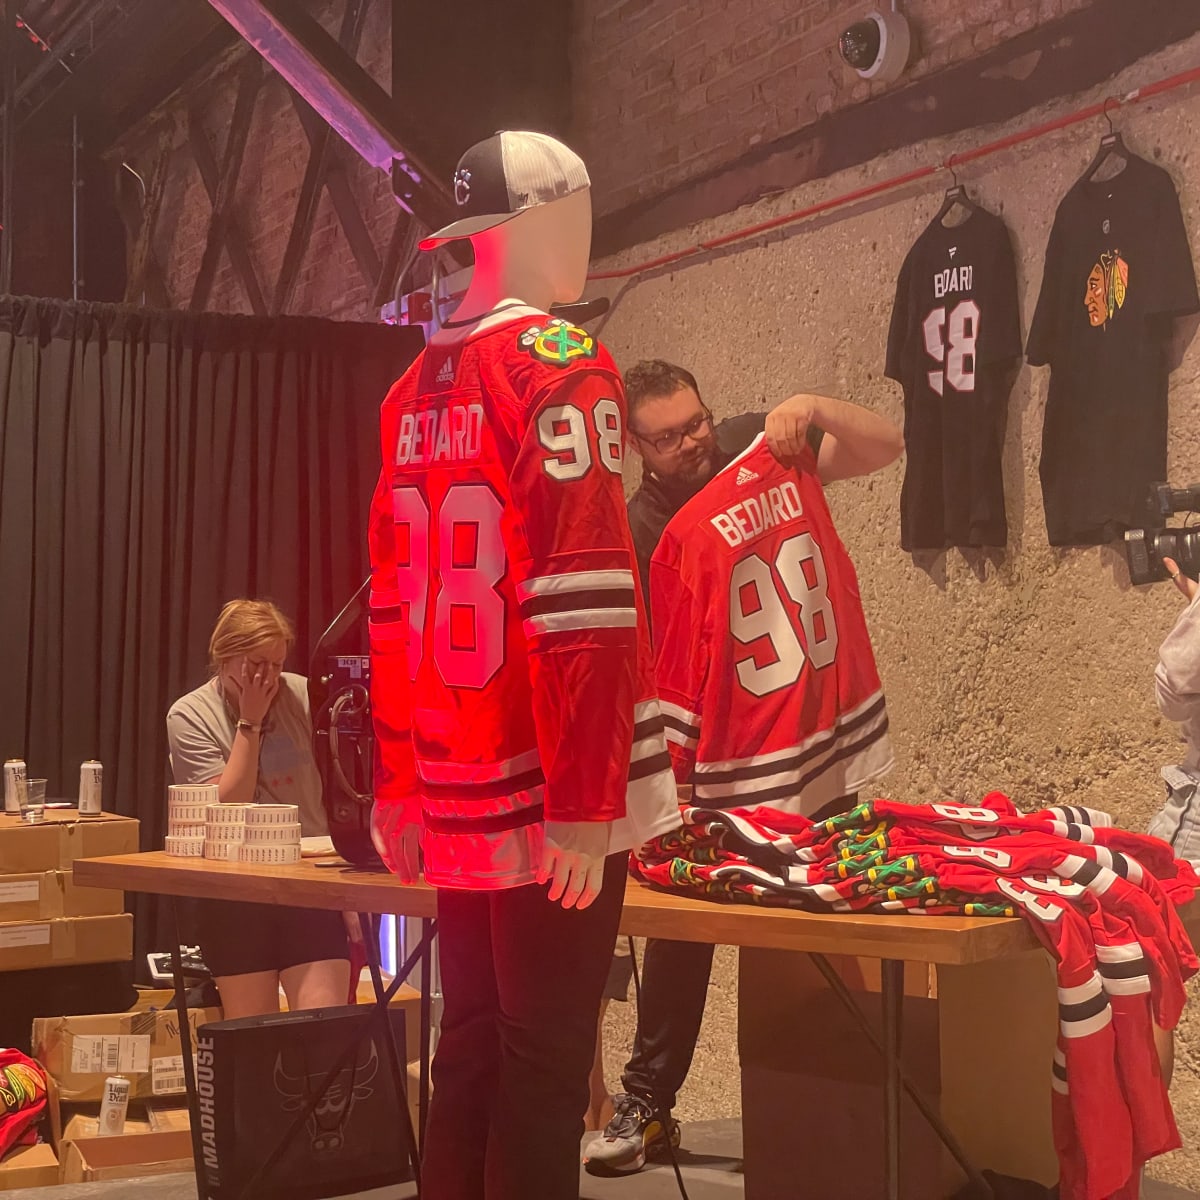 Connor Bedard Chicago Blackhawks Jersey, Get your #98 Bedard jerseys,  shirts, and other apparel - FanNation